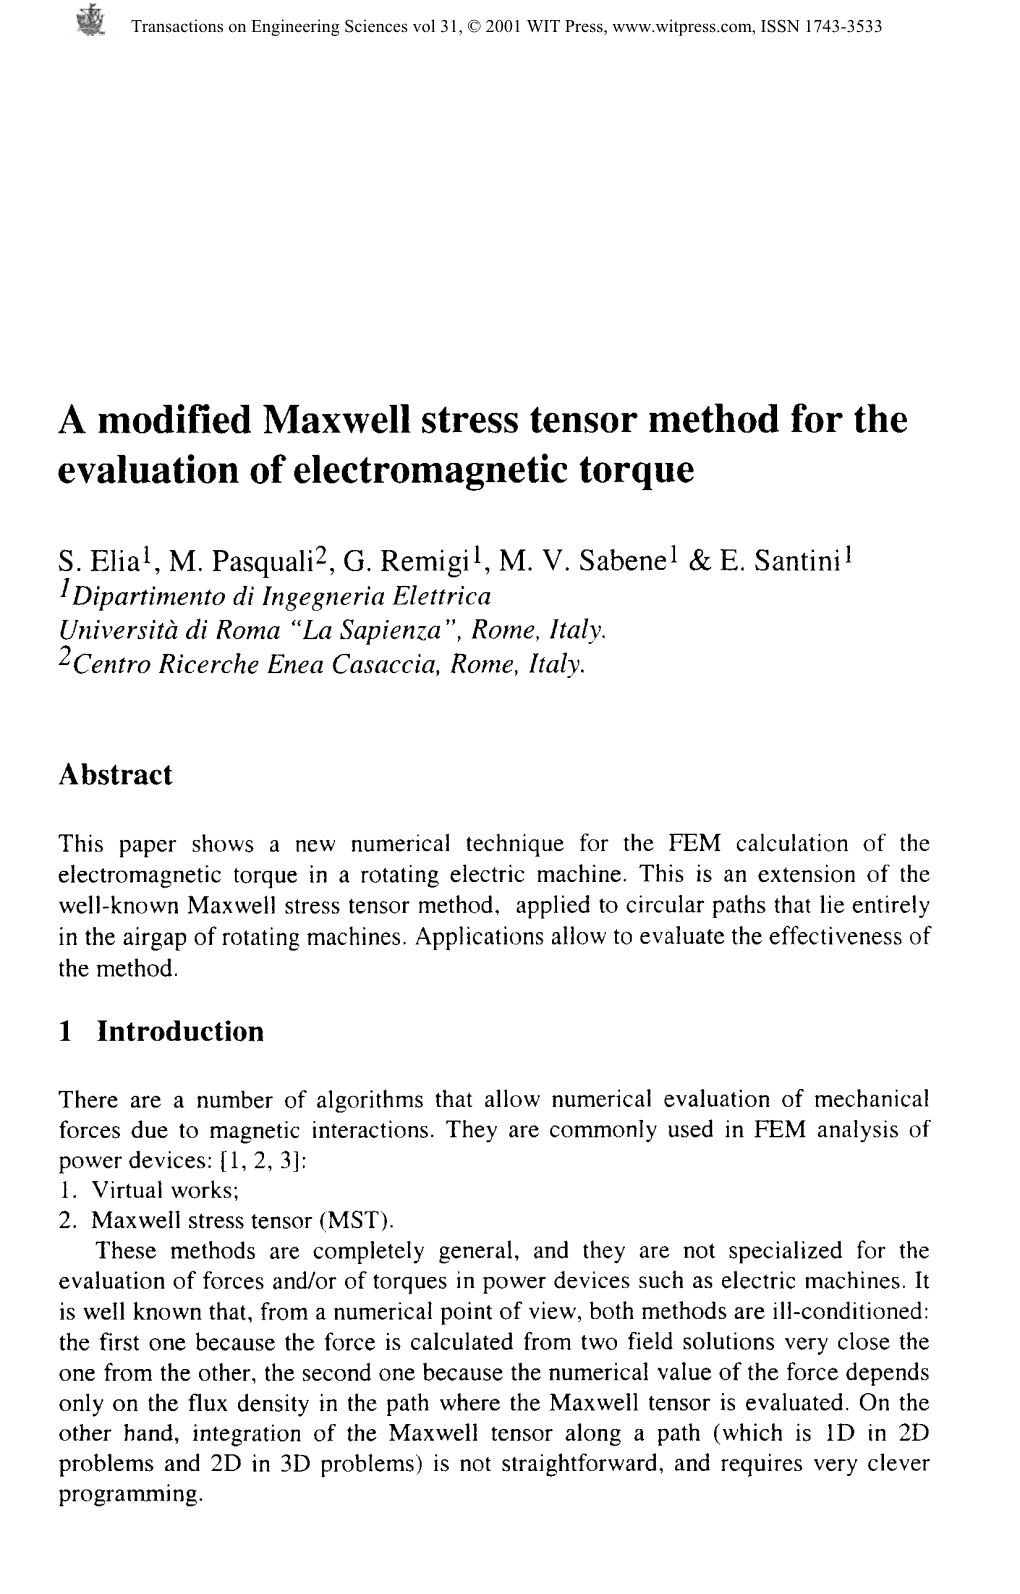 A Modified Maxwell Stress Tensor Method for the Evaluation of Electromagnetic Torque